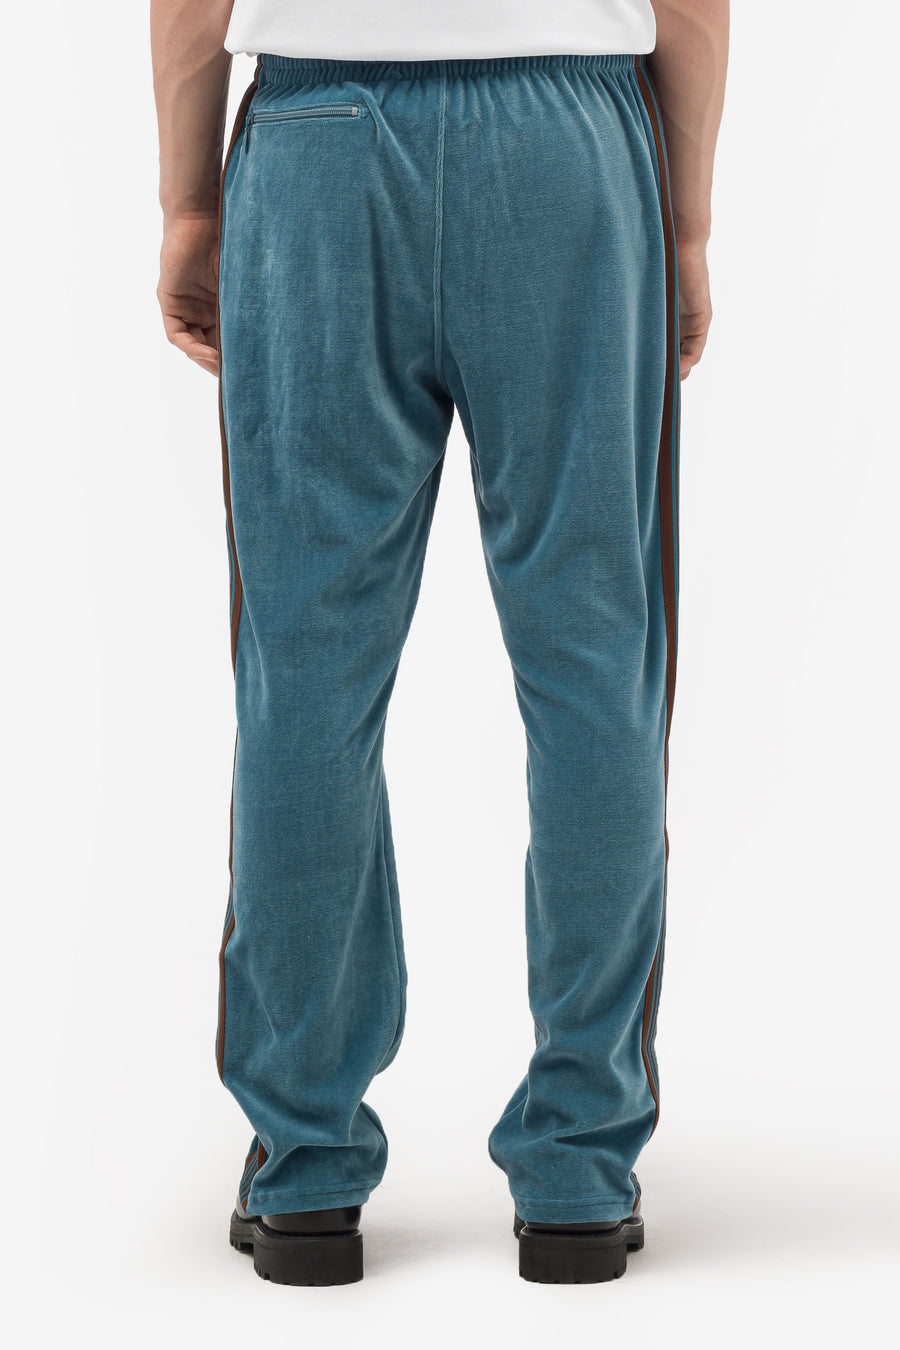 Velour Narrow Track Pants in Blue/Grey